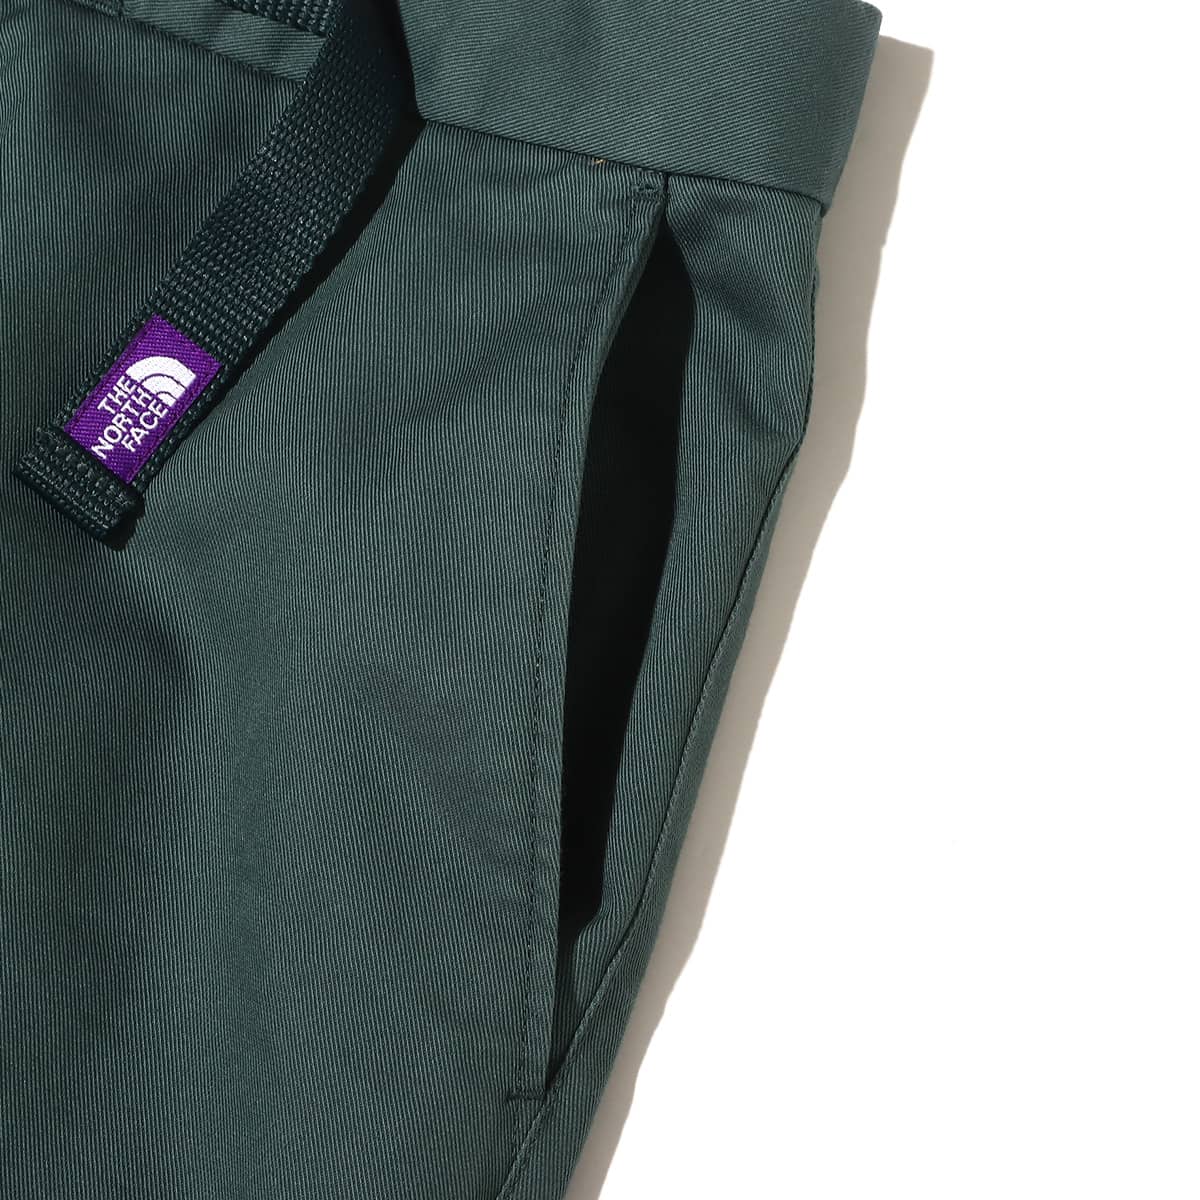 THE NORTH FACE PURPLE LABEL Stretch Twill Tapered Pants Vintage